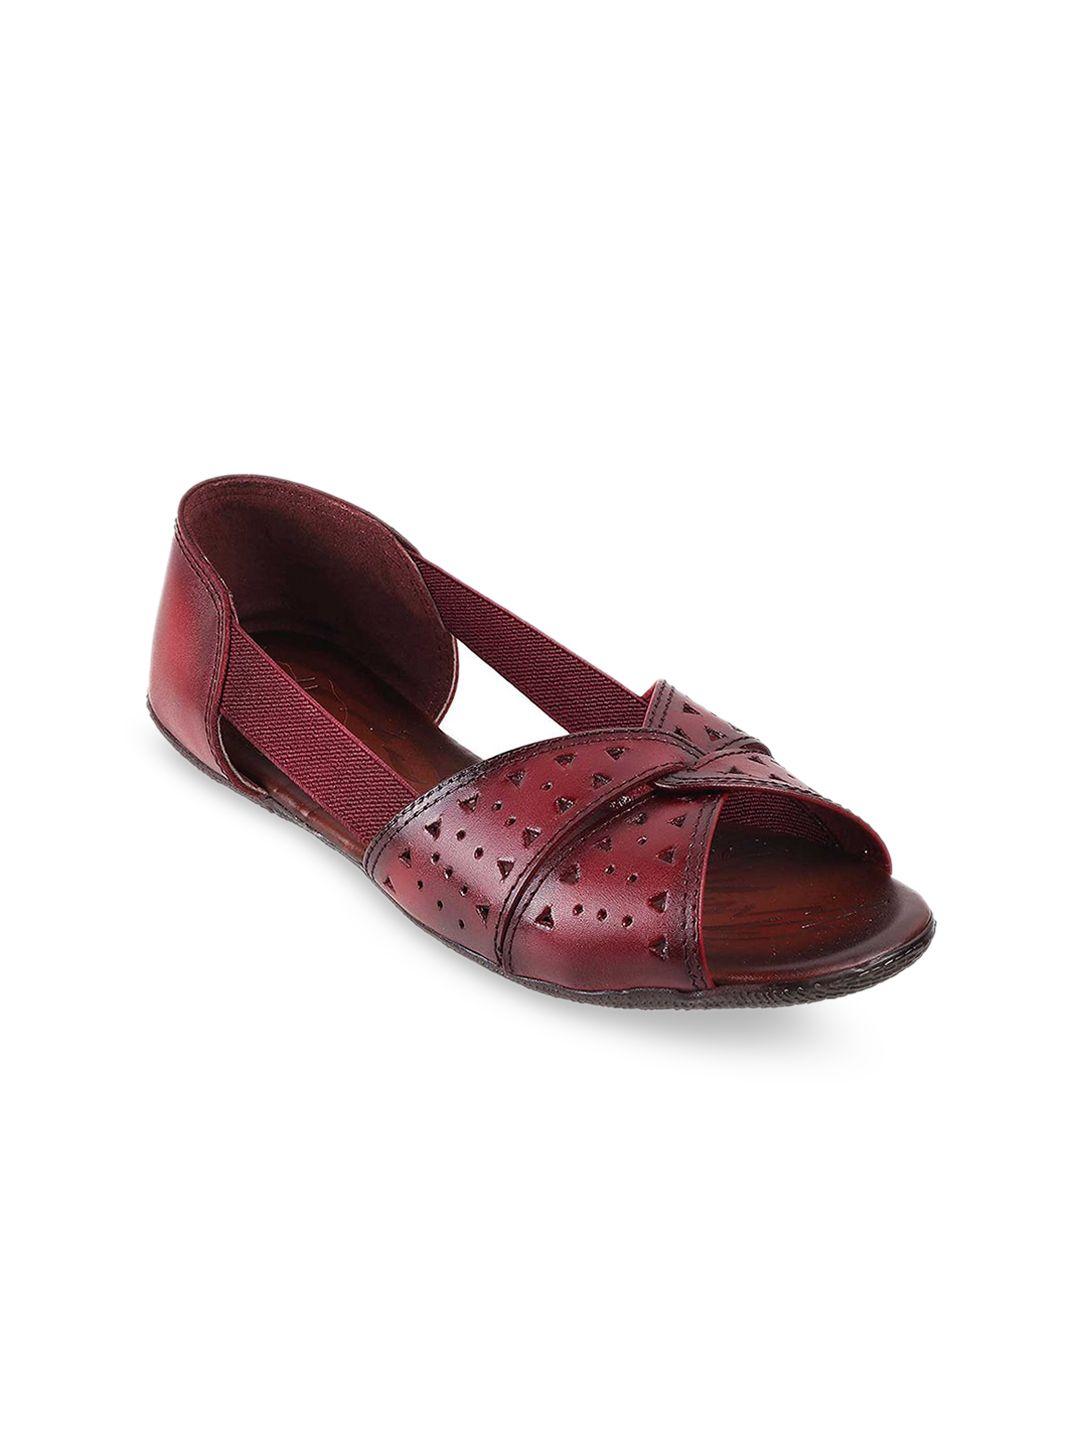 mochi-women-textured-leather-open-toe-flats-with-laser-cuts